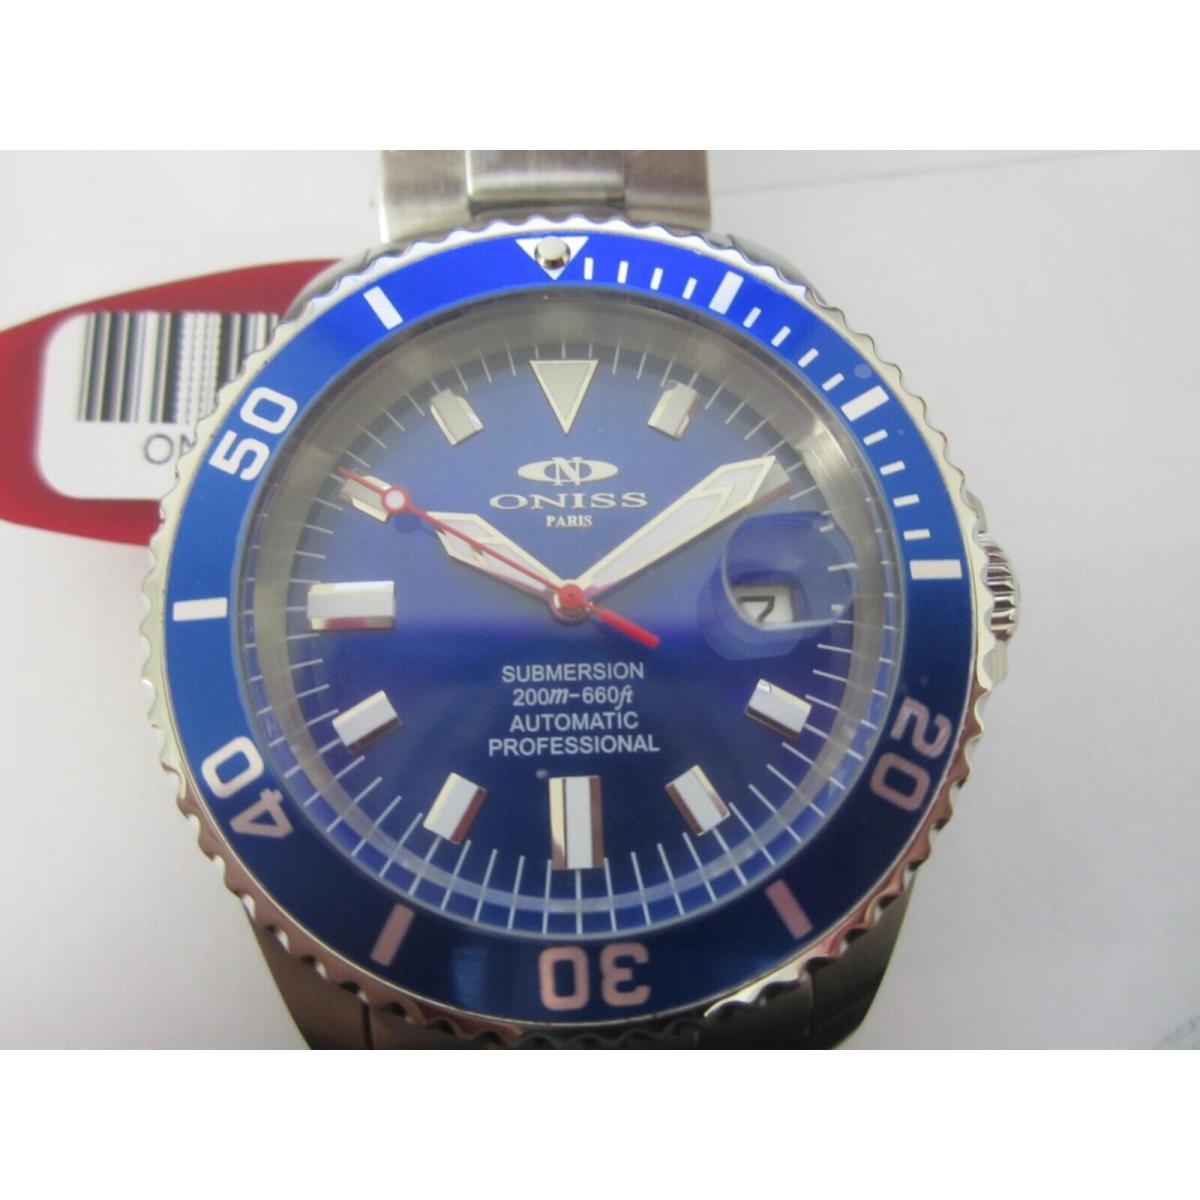 Oniss Submersion Men`s Watch Automatic Professional ON5588-22 Blue